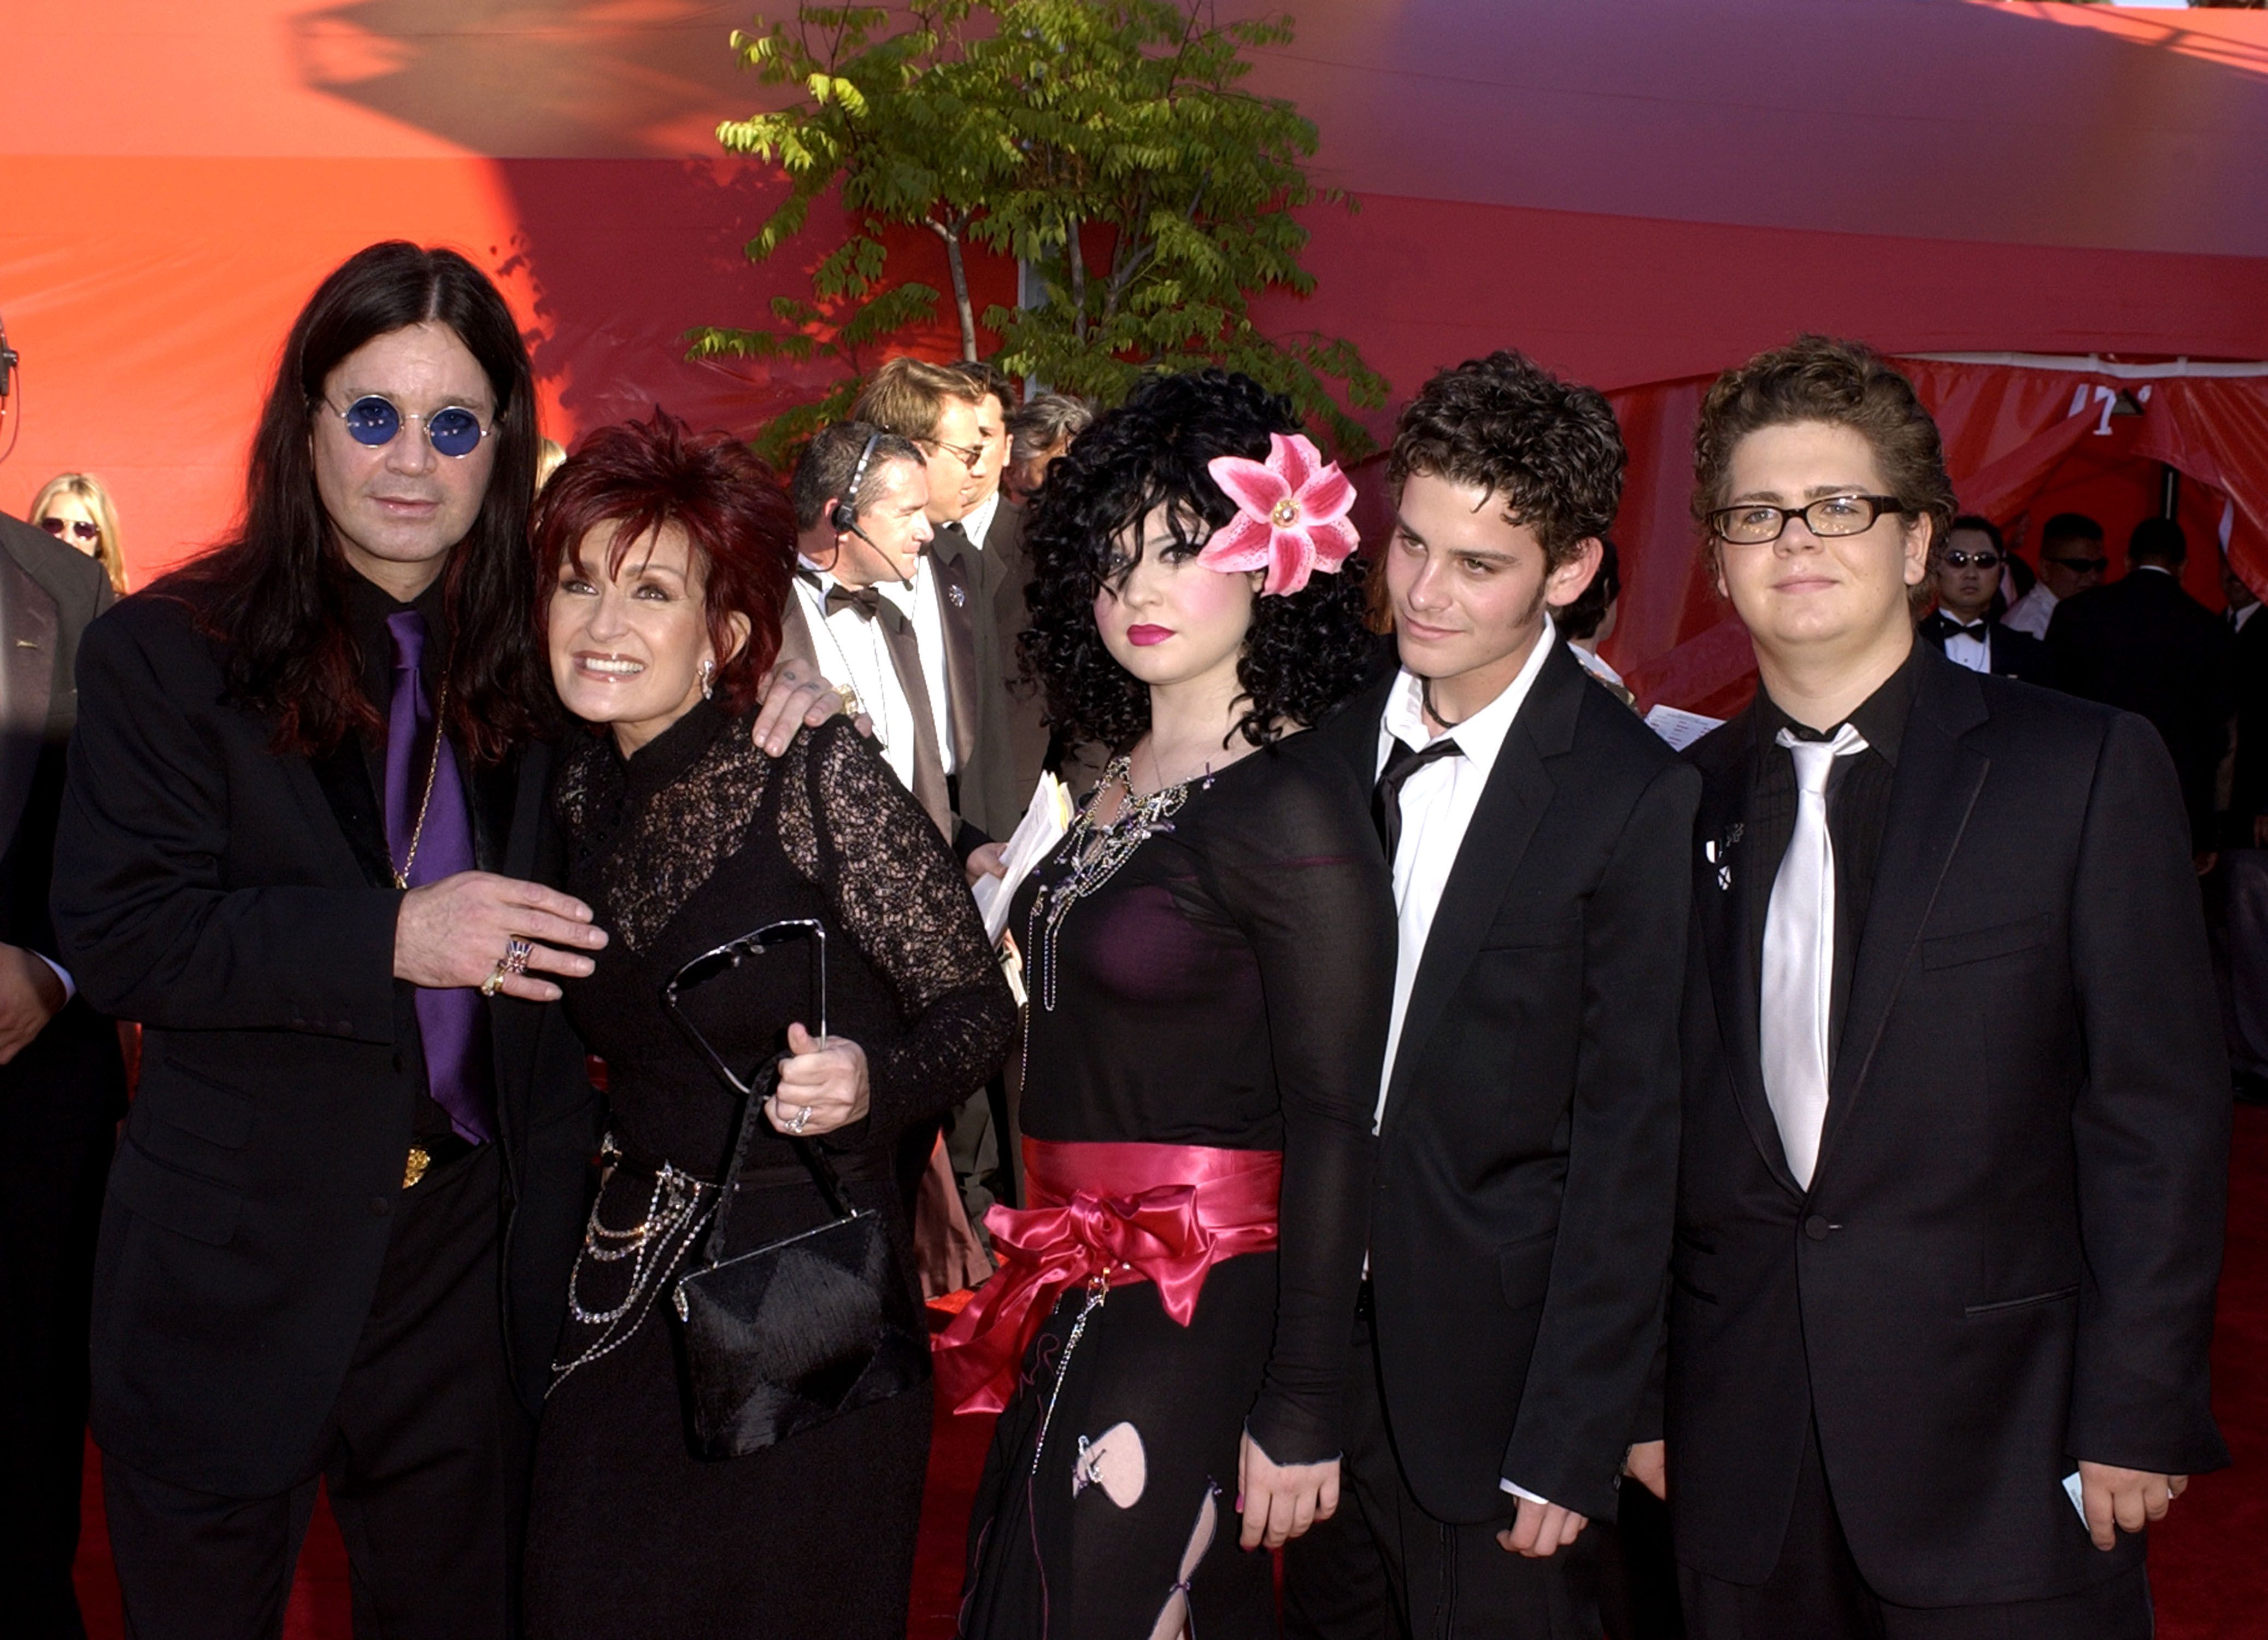 Ozzy, Sharon, Kelly, Robert Marcato, and Jack at the 54th Annual Emmy Awards at the Shrine Auditorium in Los Angeles 22 September 2002. | Photo: Getty Images